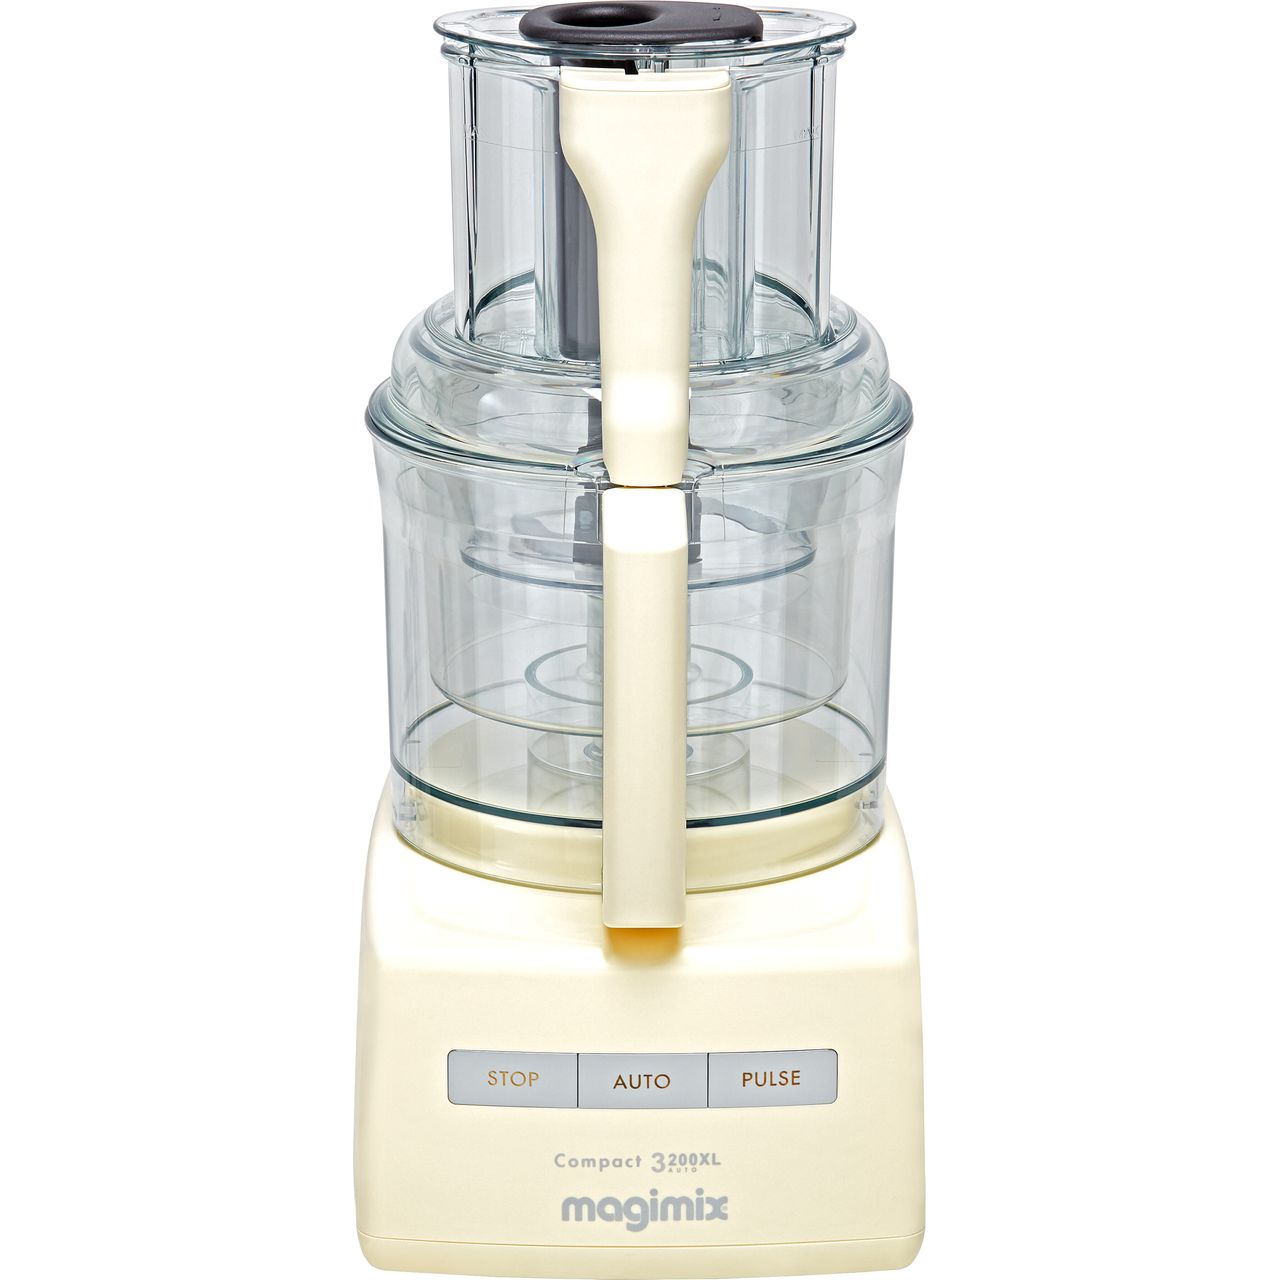 Magimix 3200XL 18365 2.6 Litre Food Processor With 12 Accessories Review